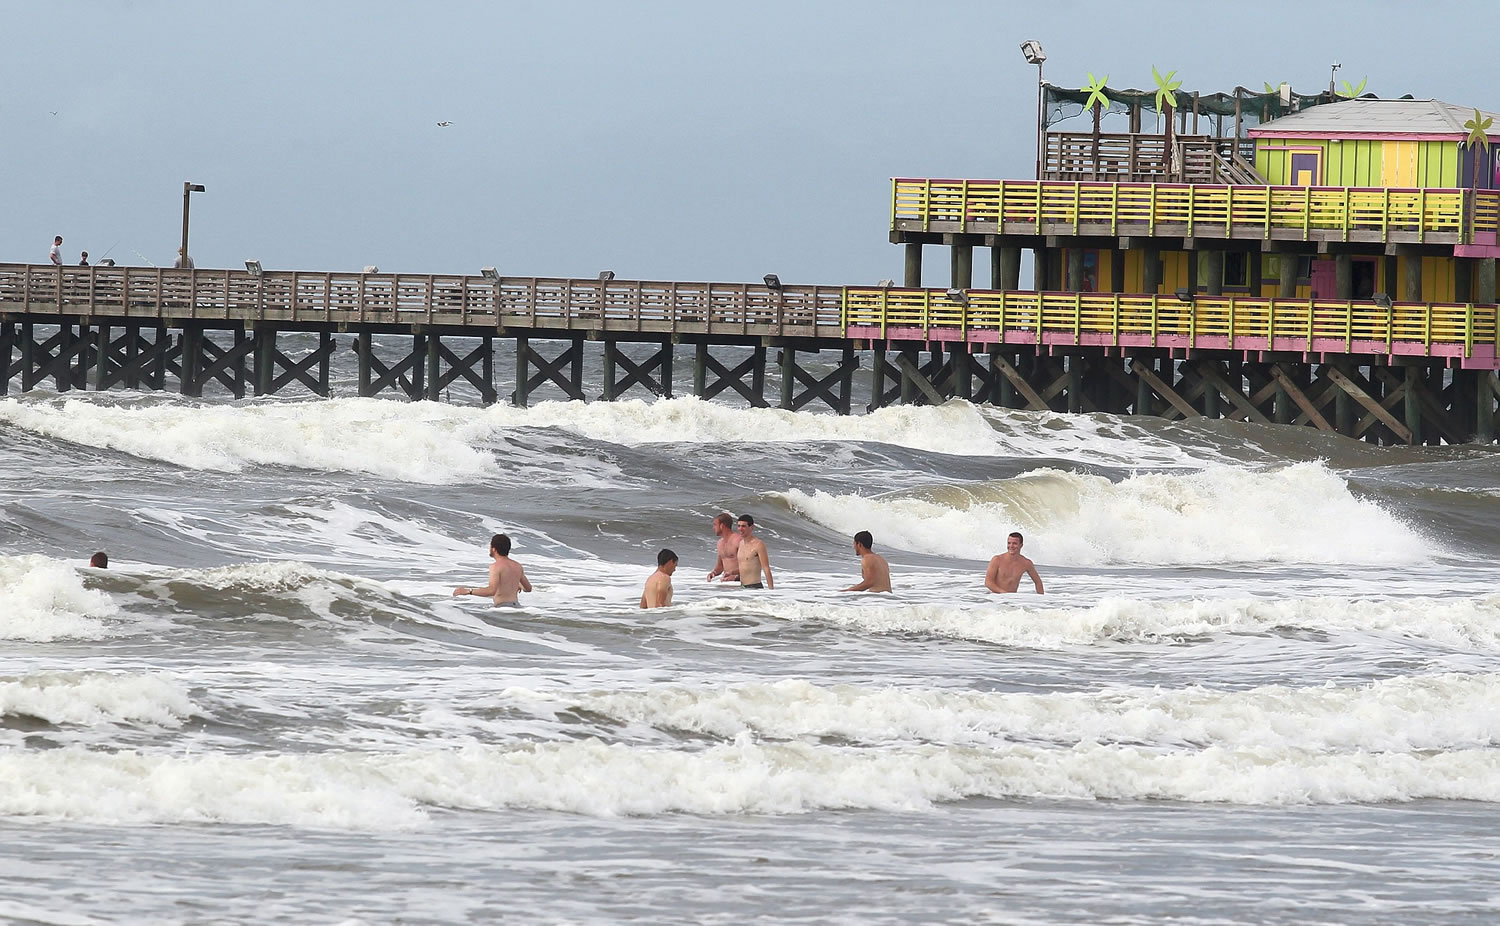 Rough surf doesn't deter swimmers near the 61st Street Pier in Galveston, Texas, on Monday.